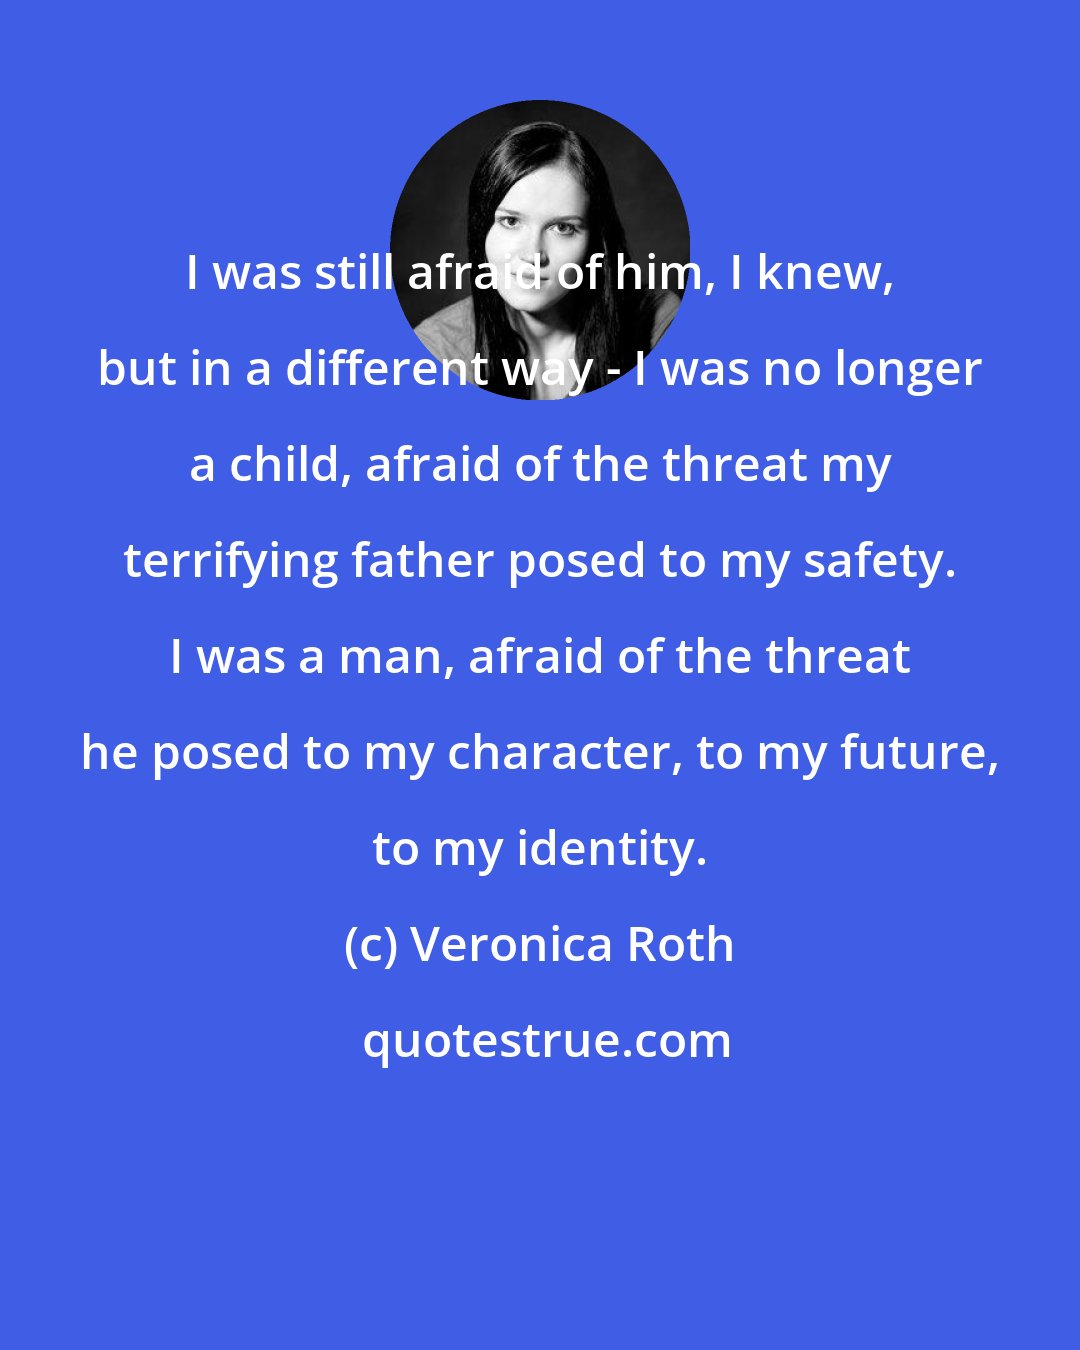 Veronica Roth: I was still afraid of him, I knew, but in a different way - I was no longer a child, afraid of the threat my terrifying father posed to my safety. I was a man, afraid of the threat he posed to my character, to my future, to my identity.